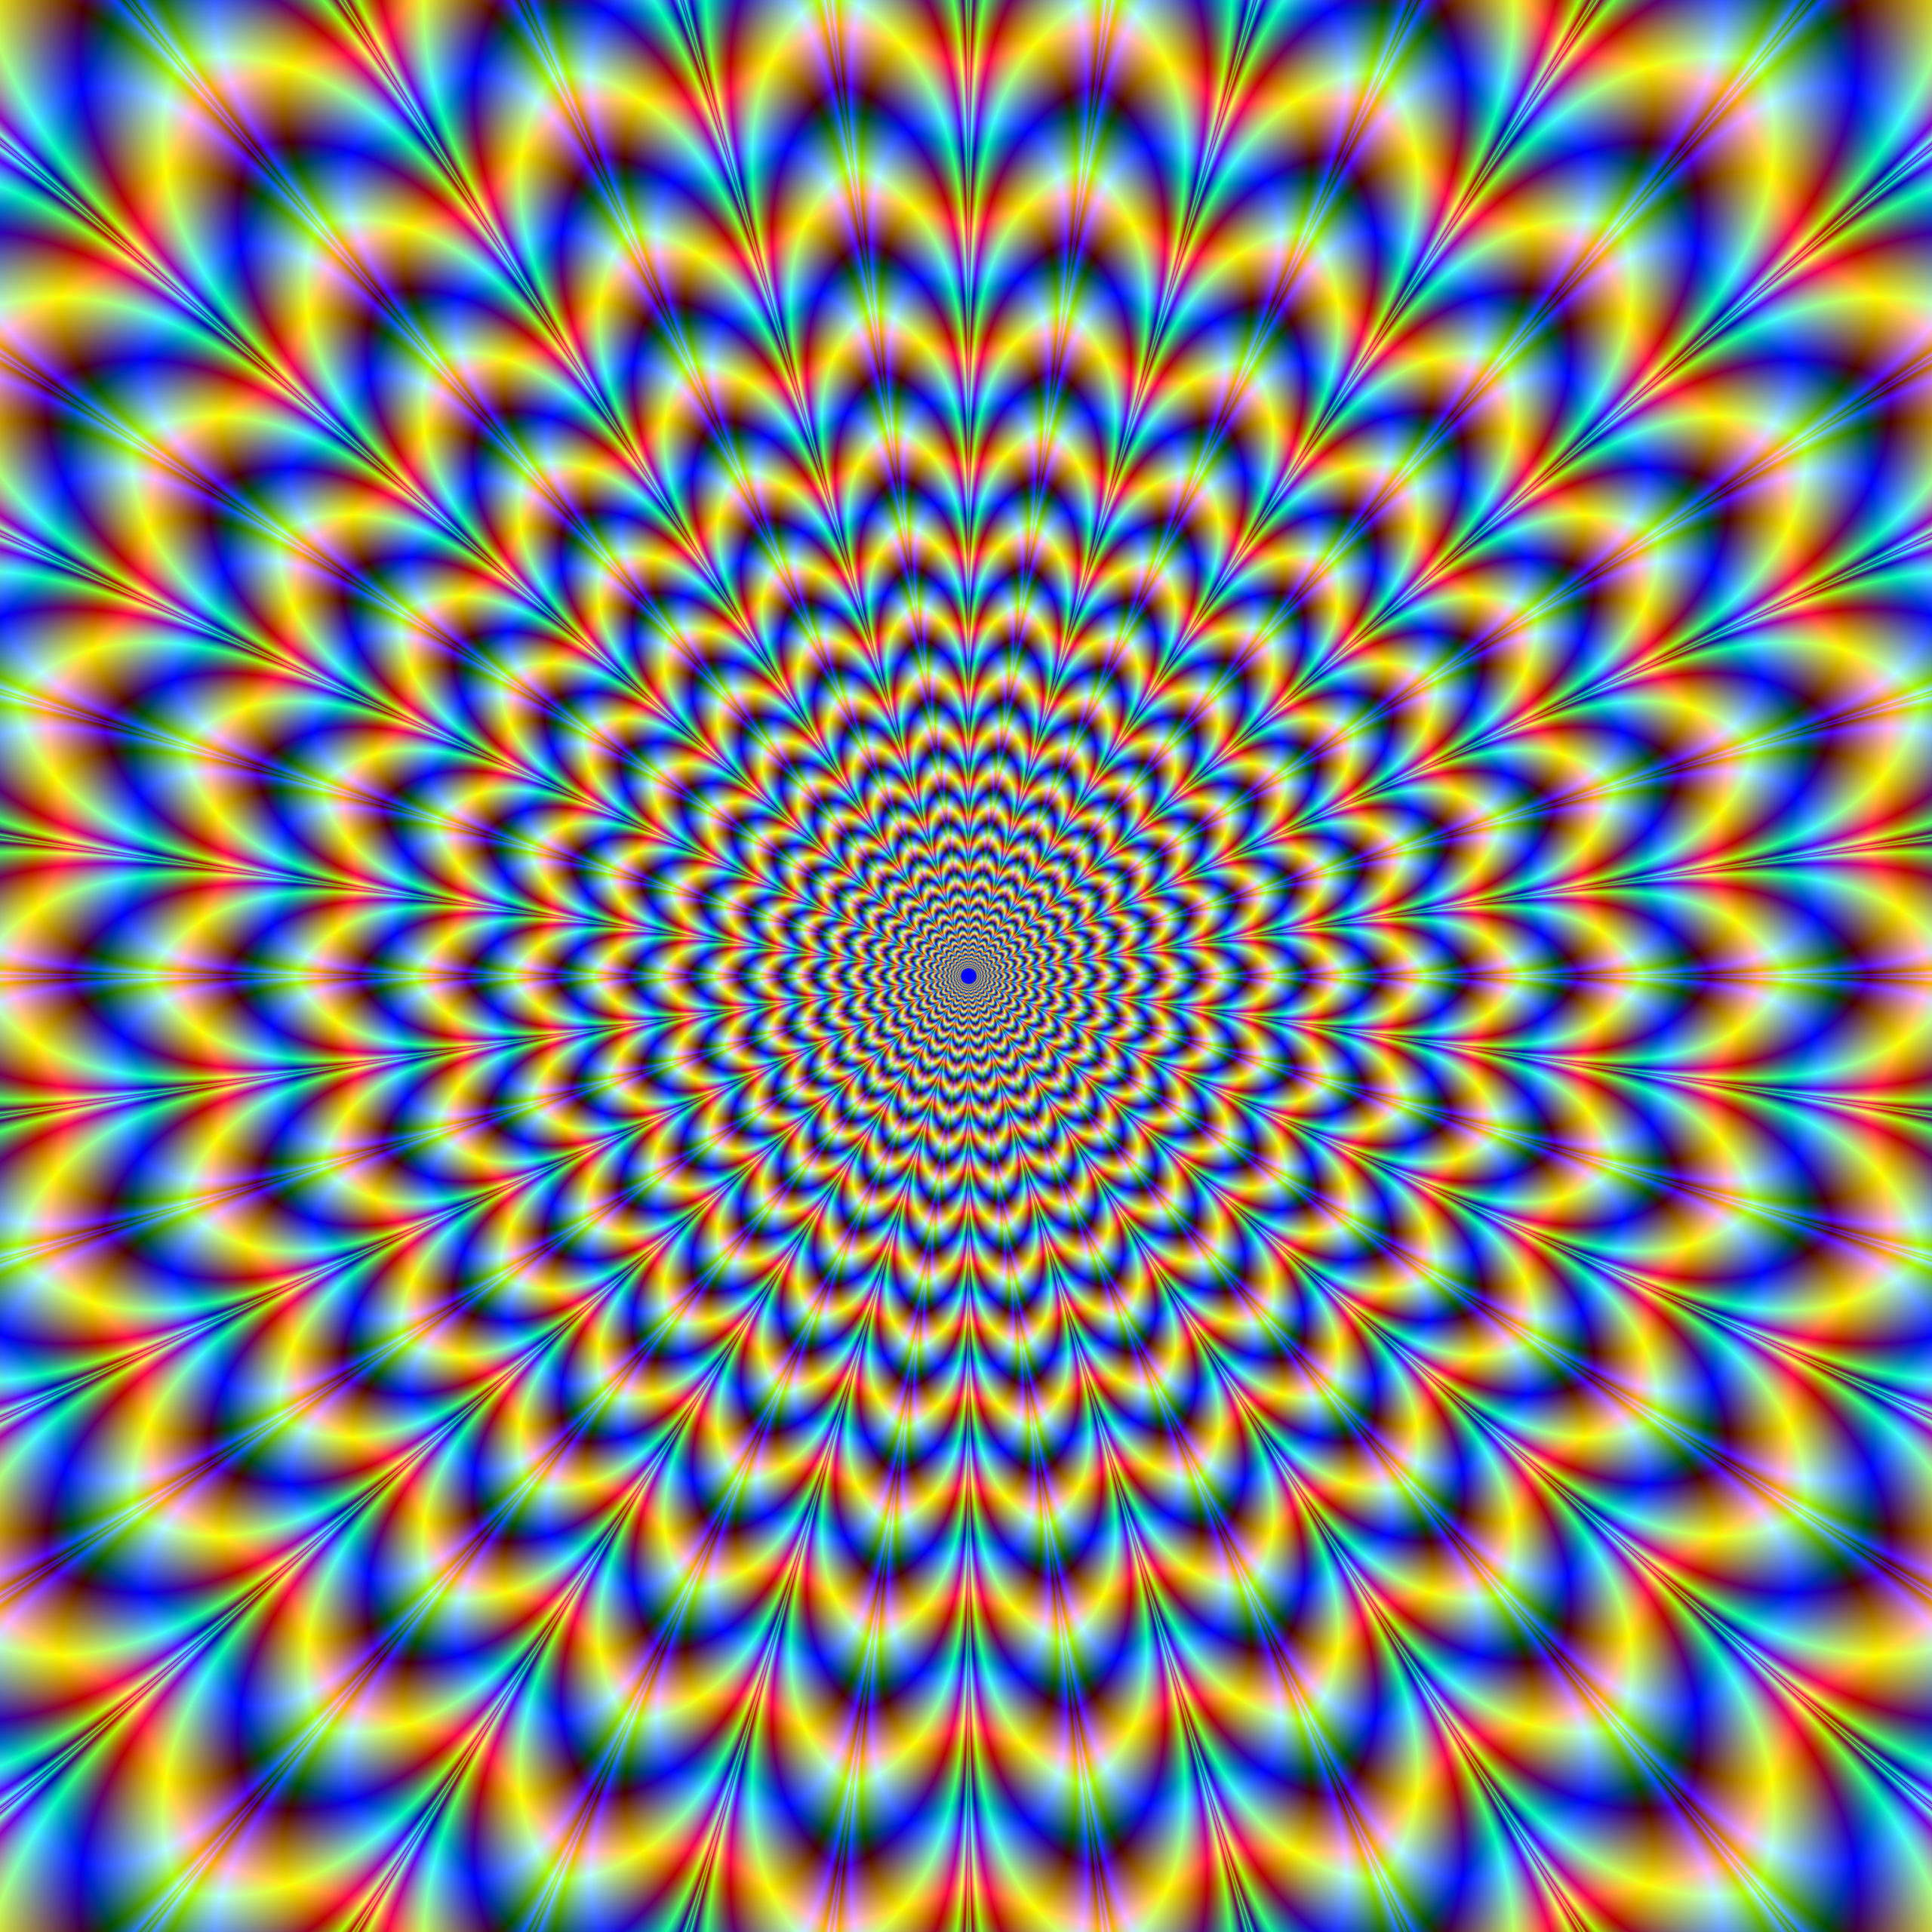 Optical Illusions: What Causes Them? Try Some Out!